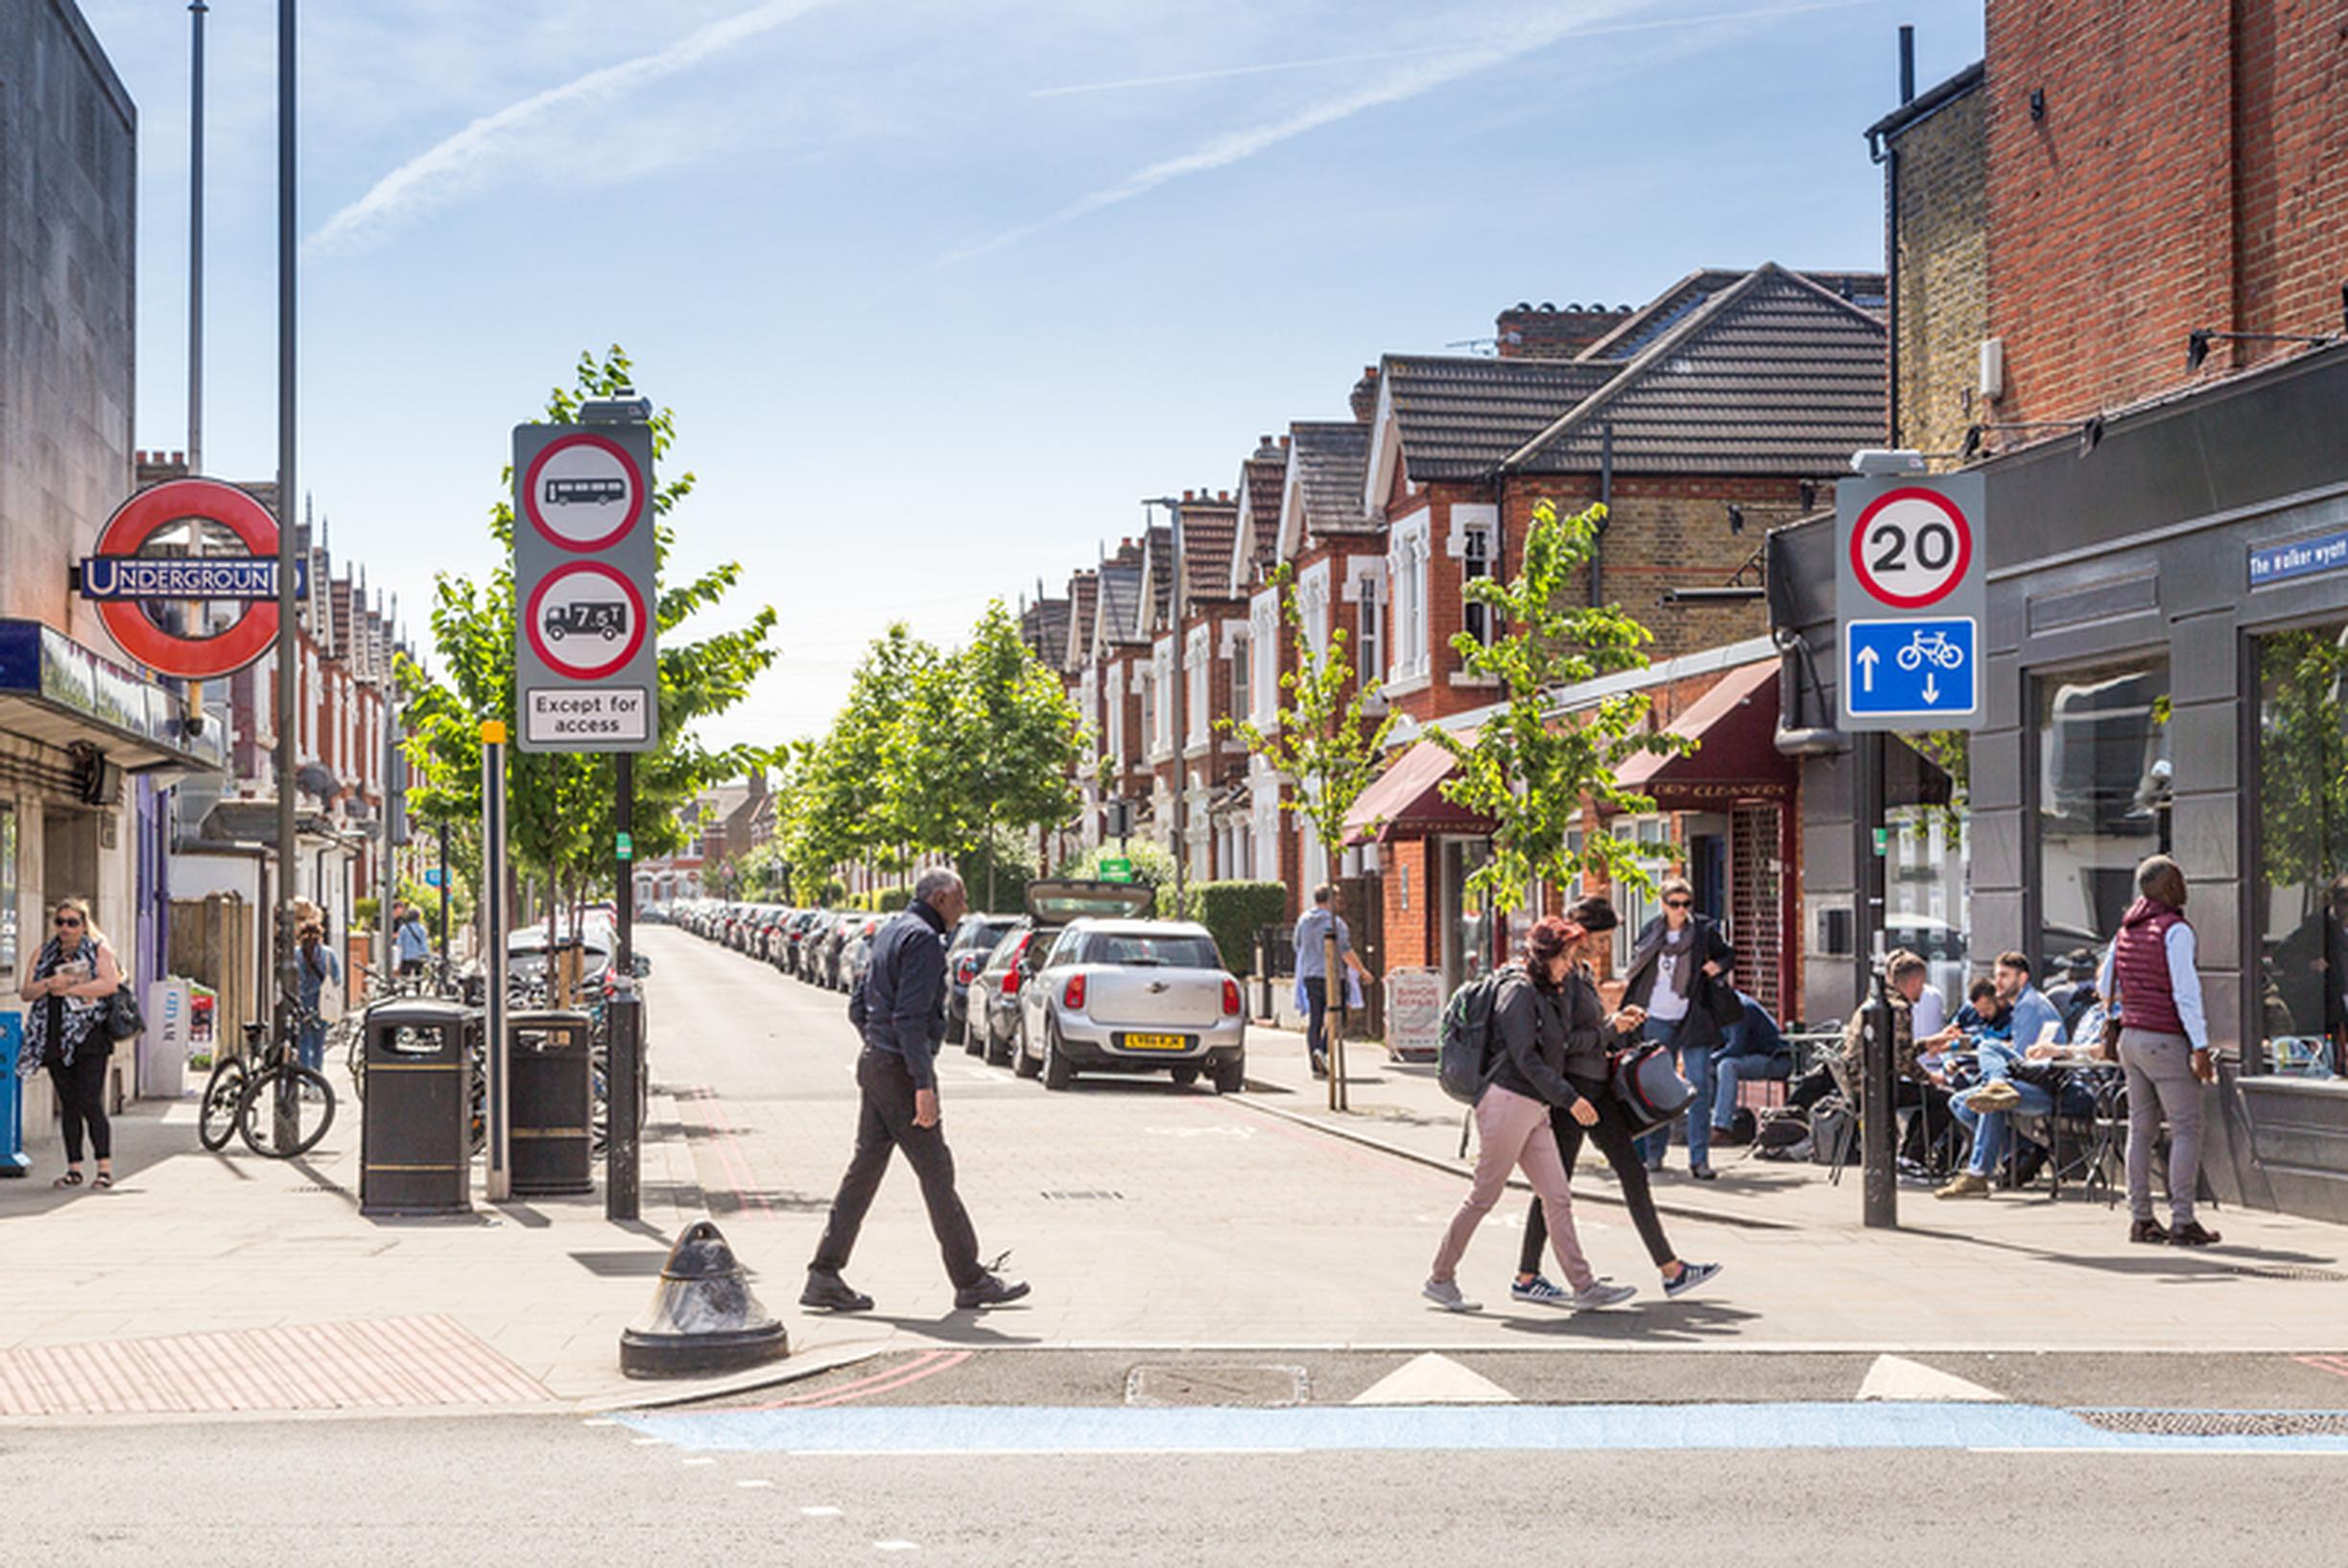 20mph limits will make a large area of south London safer and more attractive and encourage more people  to walk, cycle and use public transport more often, says TfL